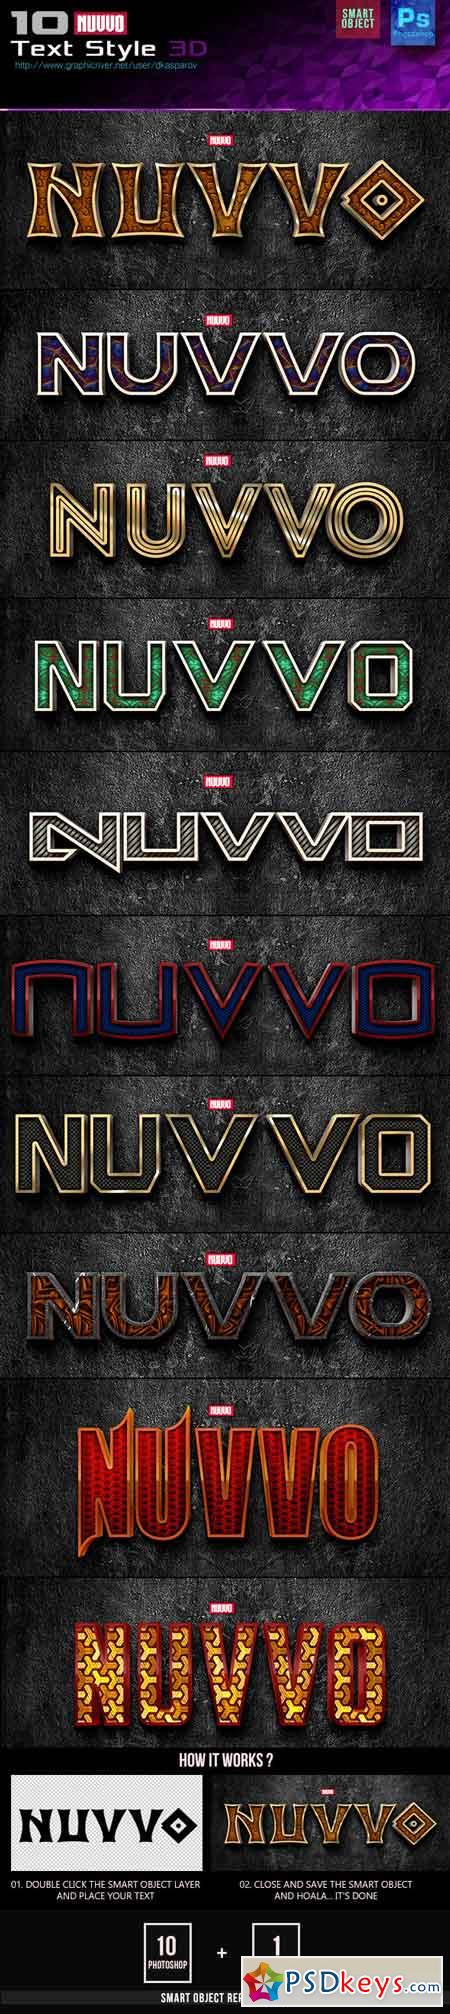 Nuvvo 3D Text Style 14491747